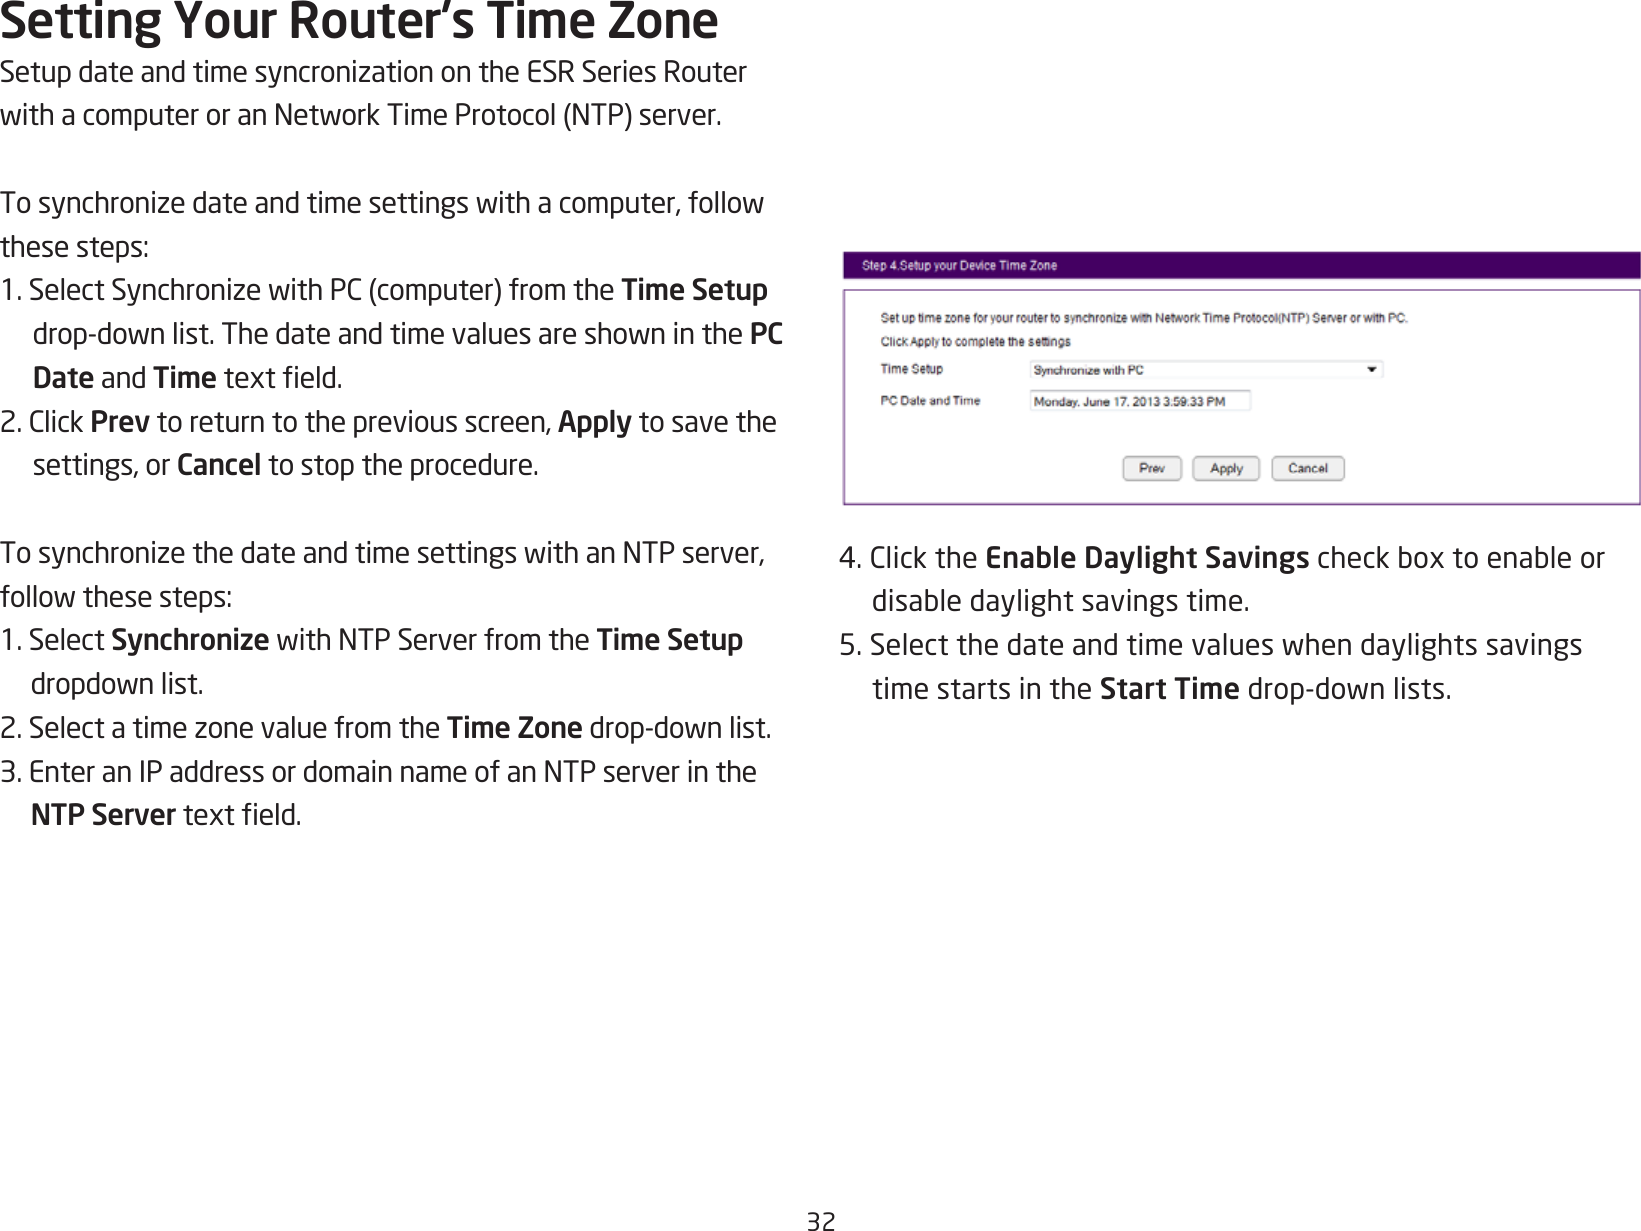 32Setting Your Router’s Time ZoneSetupdateandtimesyncronizationontheESRSeriesRouterwithacomputeroranNetworkTimeProtocol(NTP)server.Tosynchronizedateandtimesettingswithacomputer,followthesesteps:1.SelectSynchronizewithPC(computer)fromtheTime Setup drop-downlist.ThedateandtimevaluesareshowninthePC Date and Timetexteld.2.ClickPrev to return to the previous screen, Apply to save the settings, or Cancel to stop the procedure.TosynchronizethedateandtimesettingswithanNTPserver,followthesesteps:1. Select SynchronizewithNTPServerfromtheTime Setup dropdownlist.2.SelectatimezonevaluefromtheTime Zonedrop-downlist.3.EnteranIPaddressordomainnameofanNTPserverintheNTP Servertexteld.4.ClicktheEnable Daylight Savingscheckboxtoenableordisabledaylightsavingstime.5.Selectthedateandtimevalueswhendaylightssavingstime starts in the Start Timedrop-downlists.